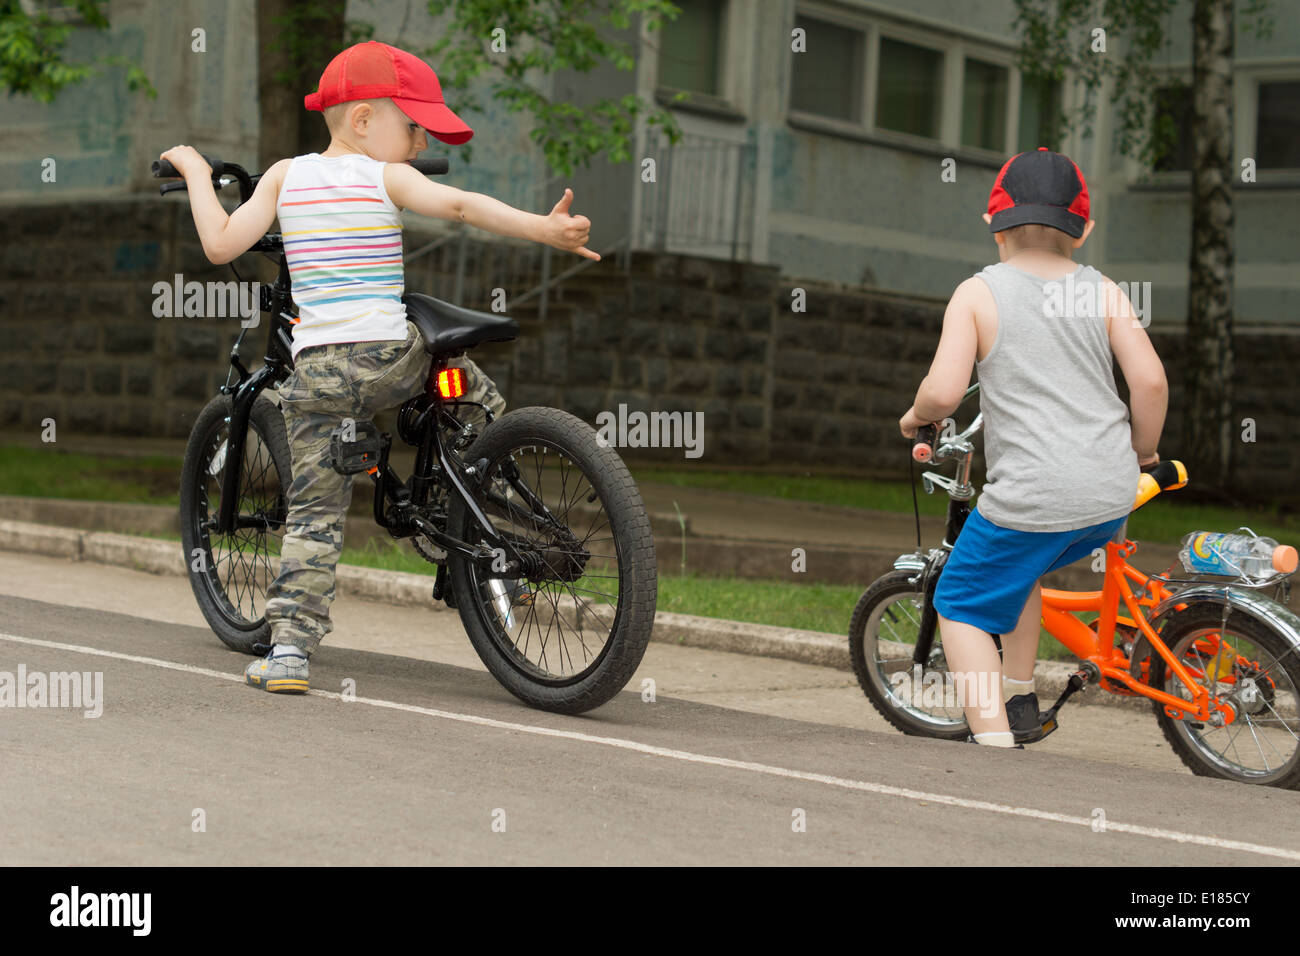 Two young boys playing together on their bikes at the side of the road in an urban environment Stock Photo